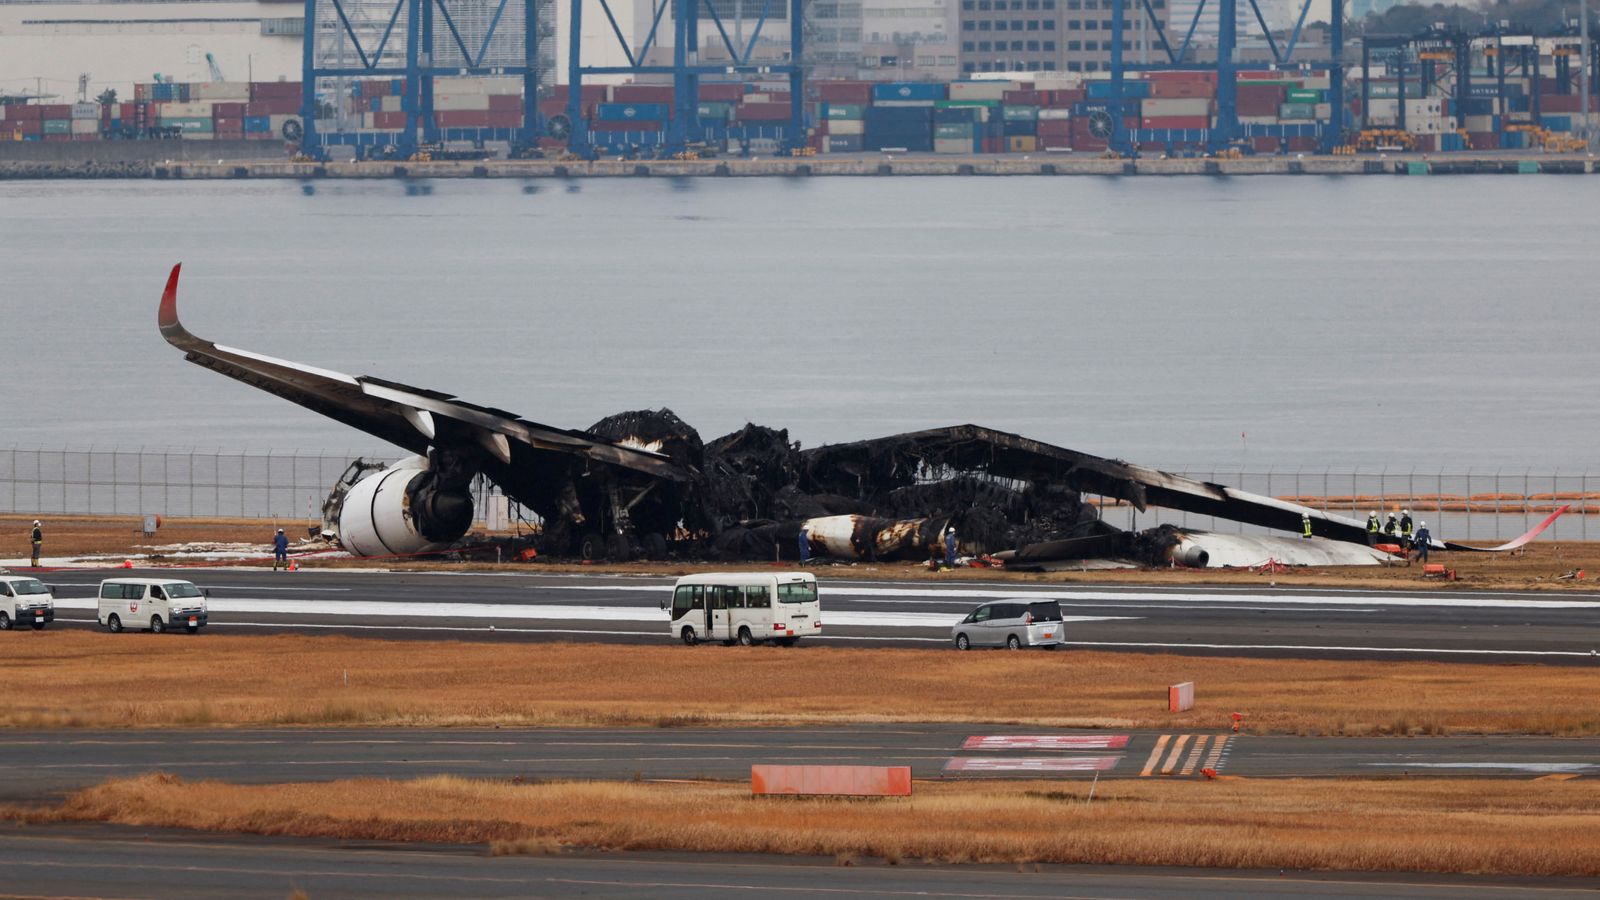 Japan plane crash: Full transcript of air traffic control moments before collision revealed